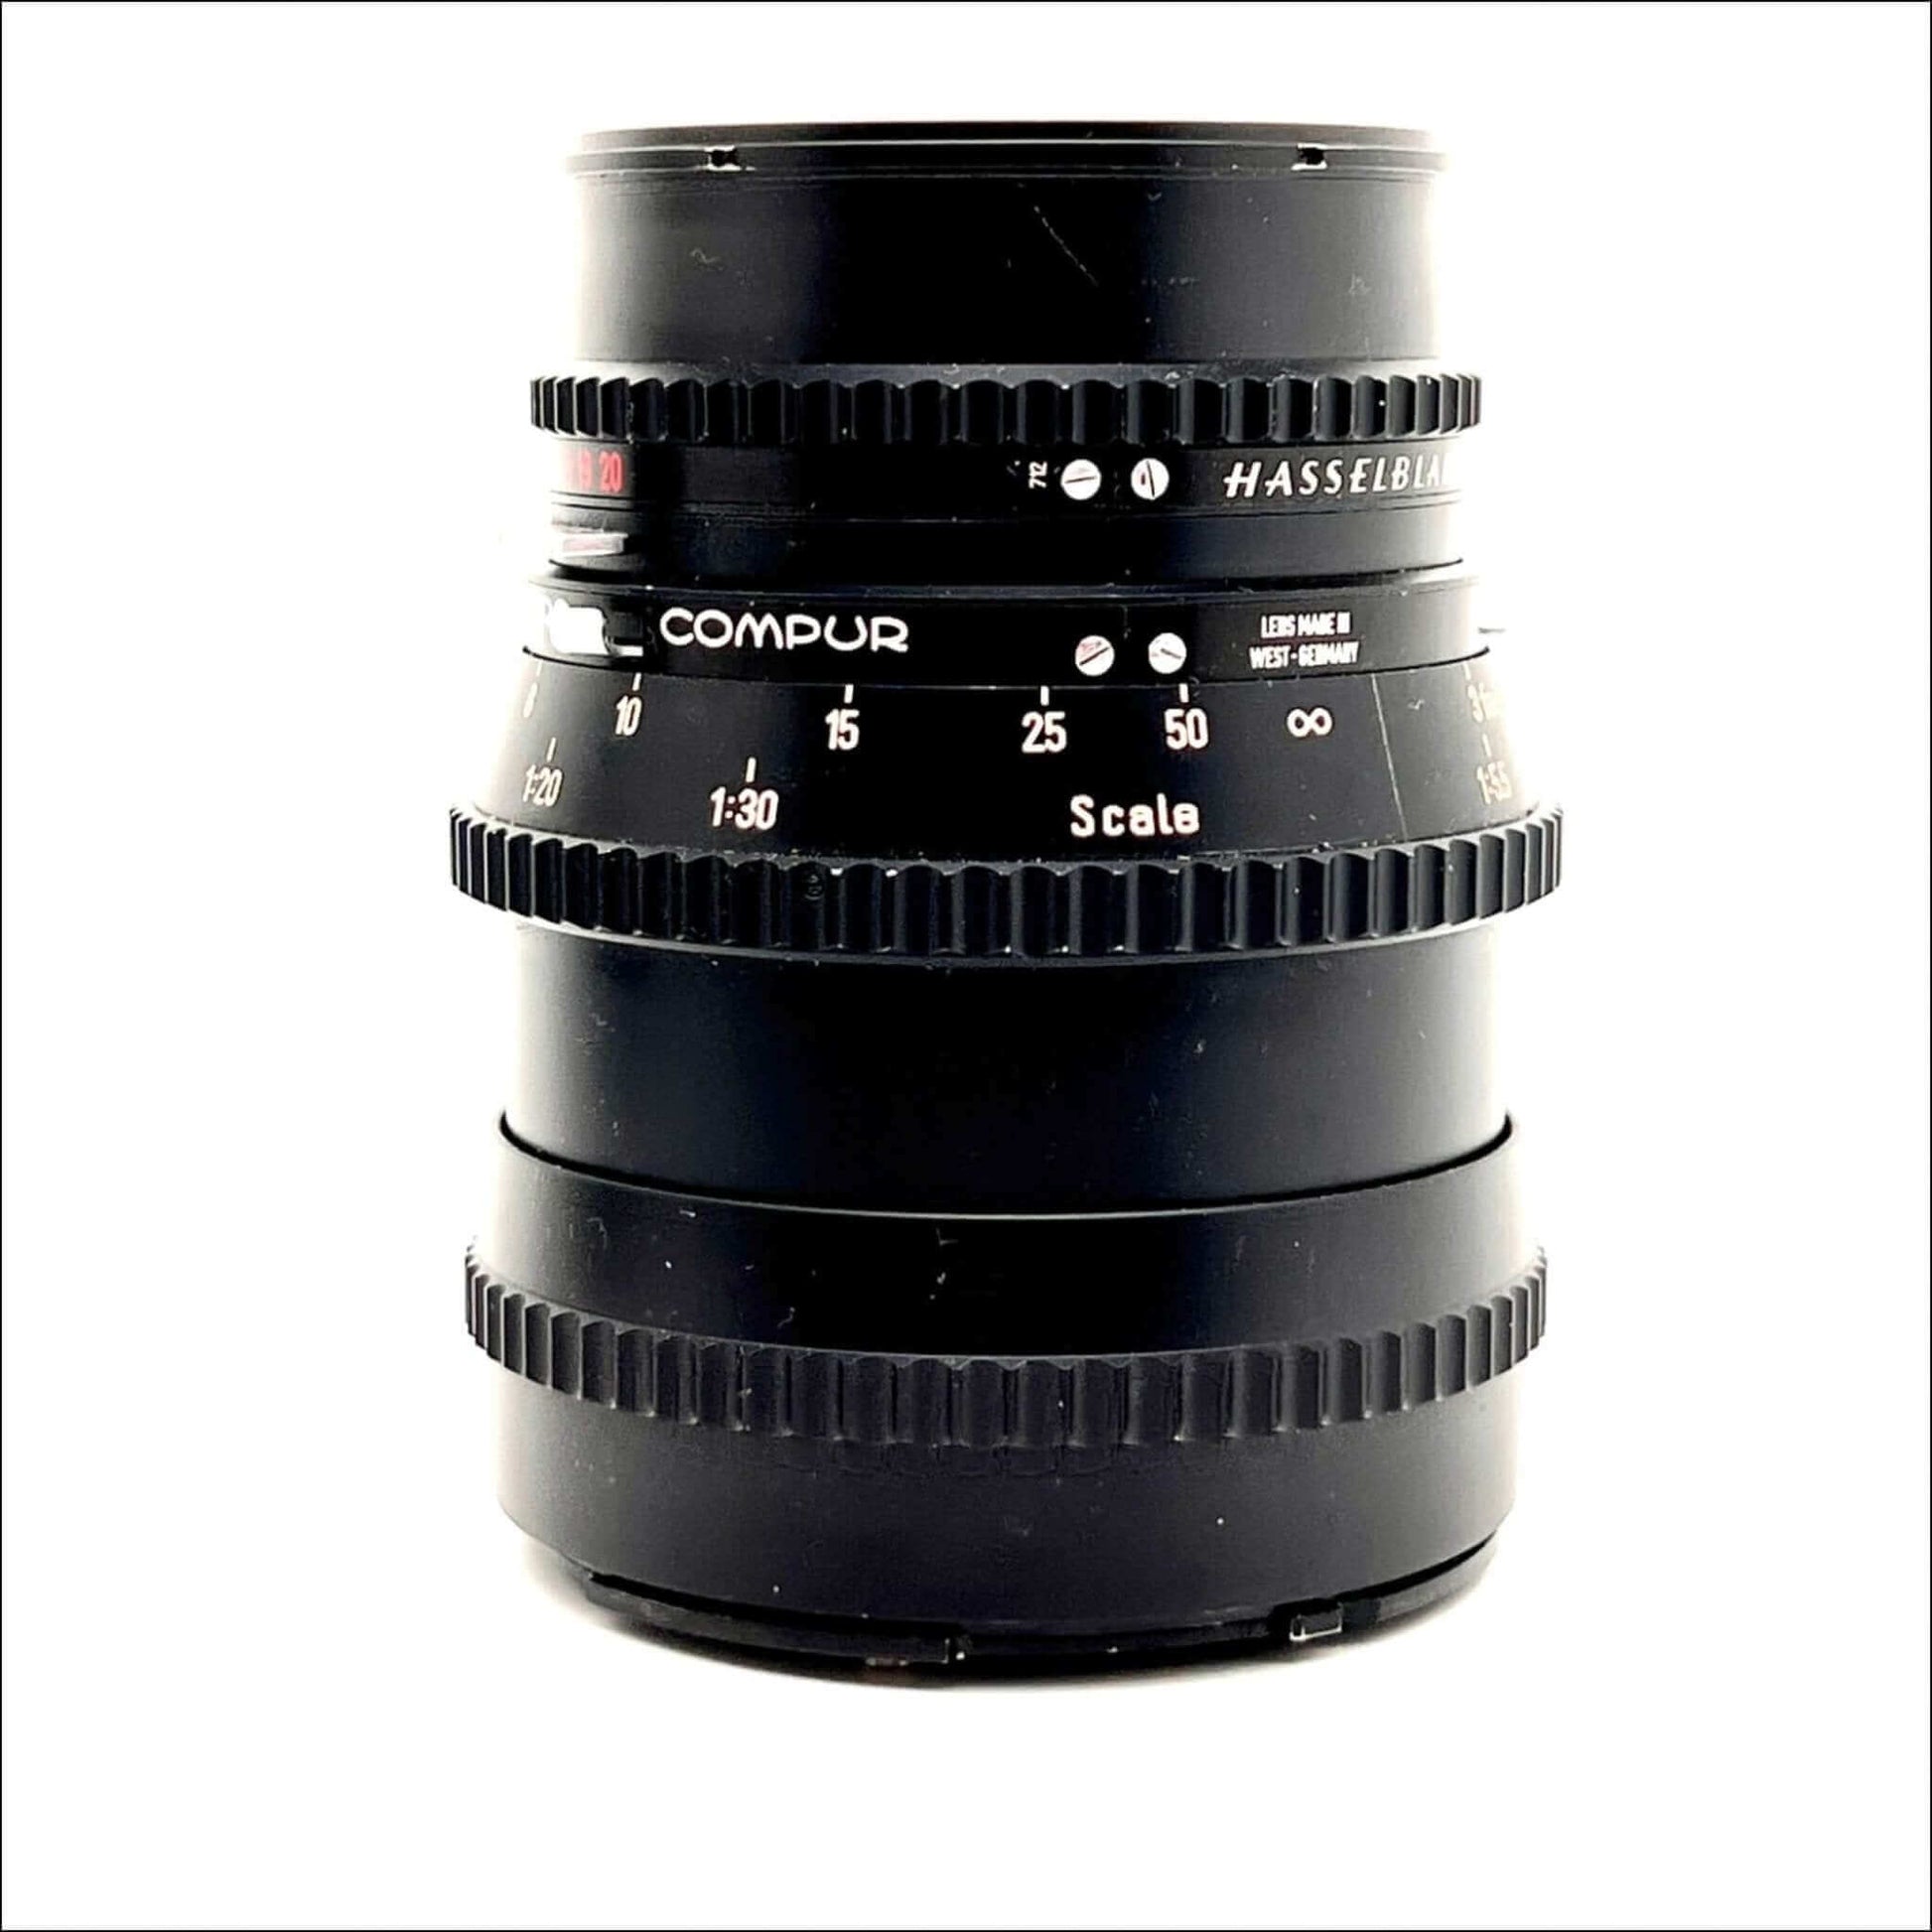 Hasselblad Used Carl Zeiss S-planar 120mm F5.6 Lens